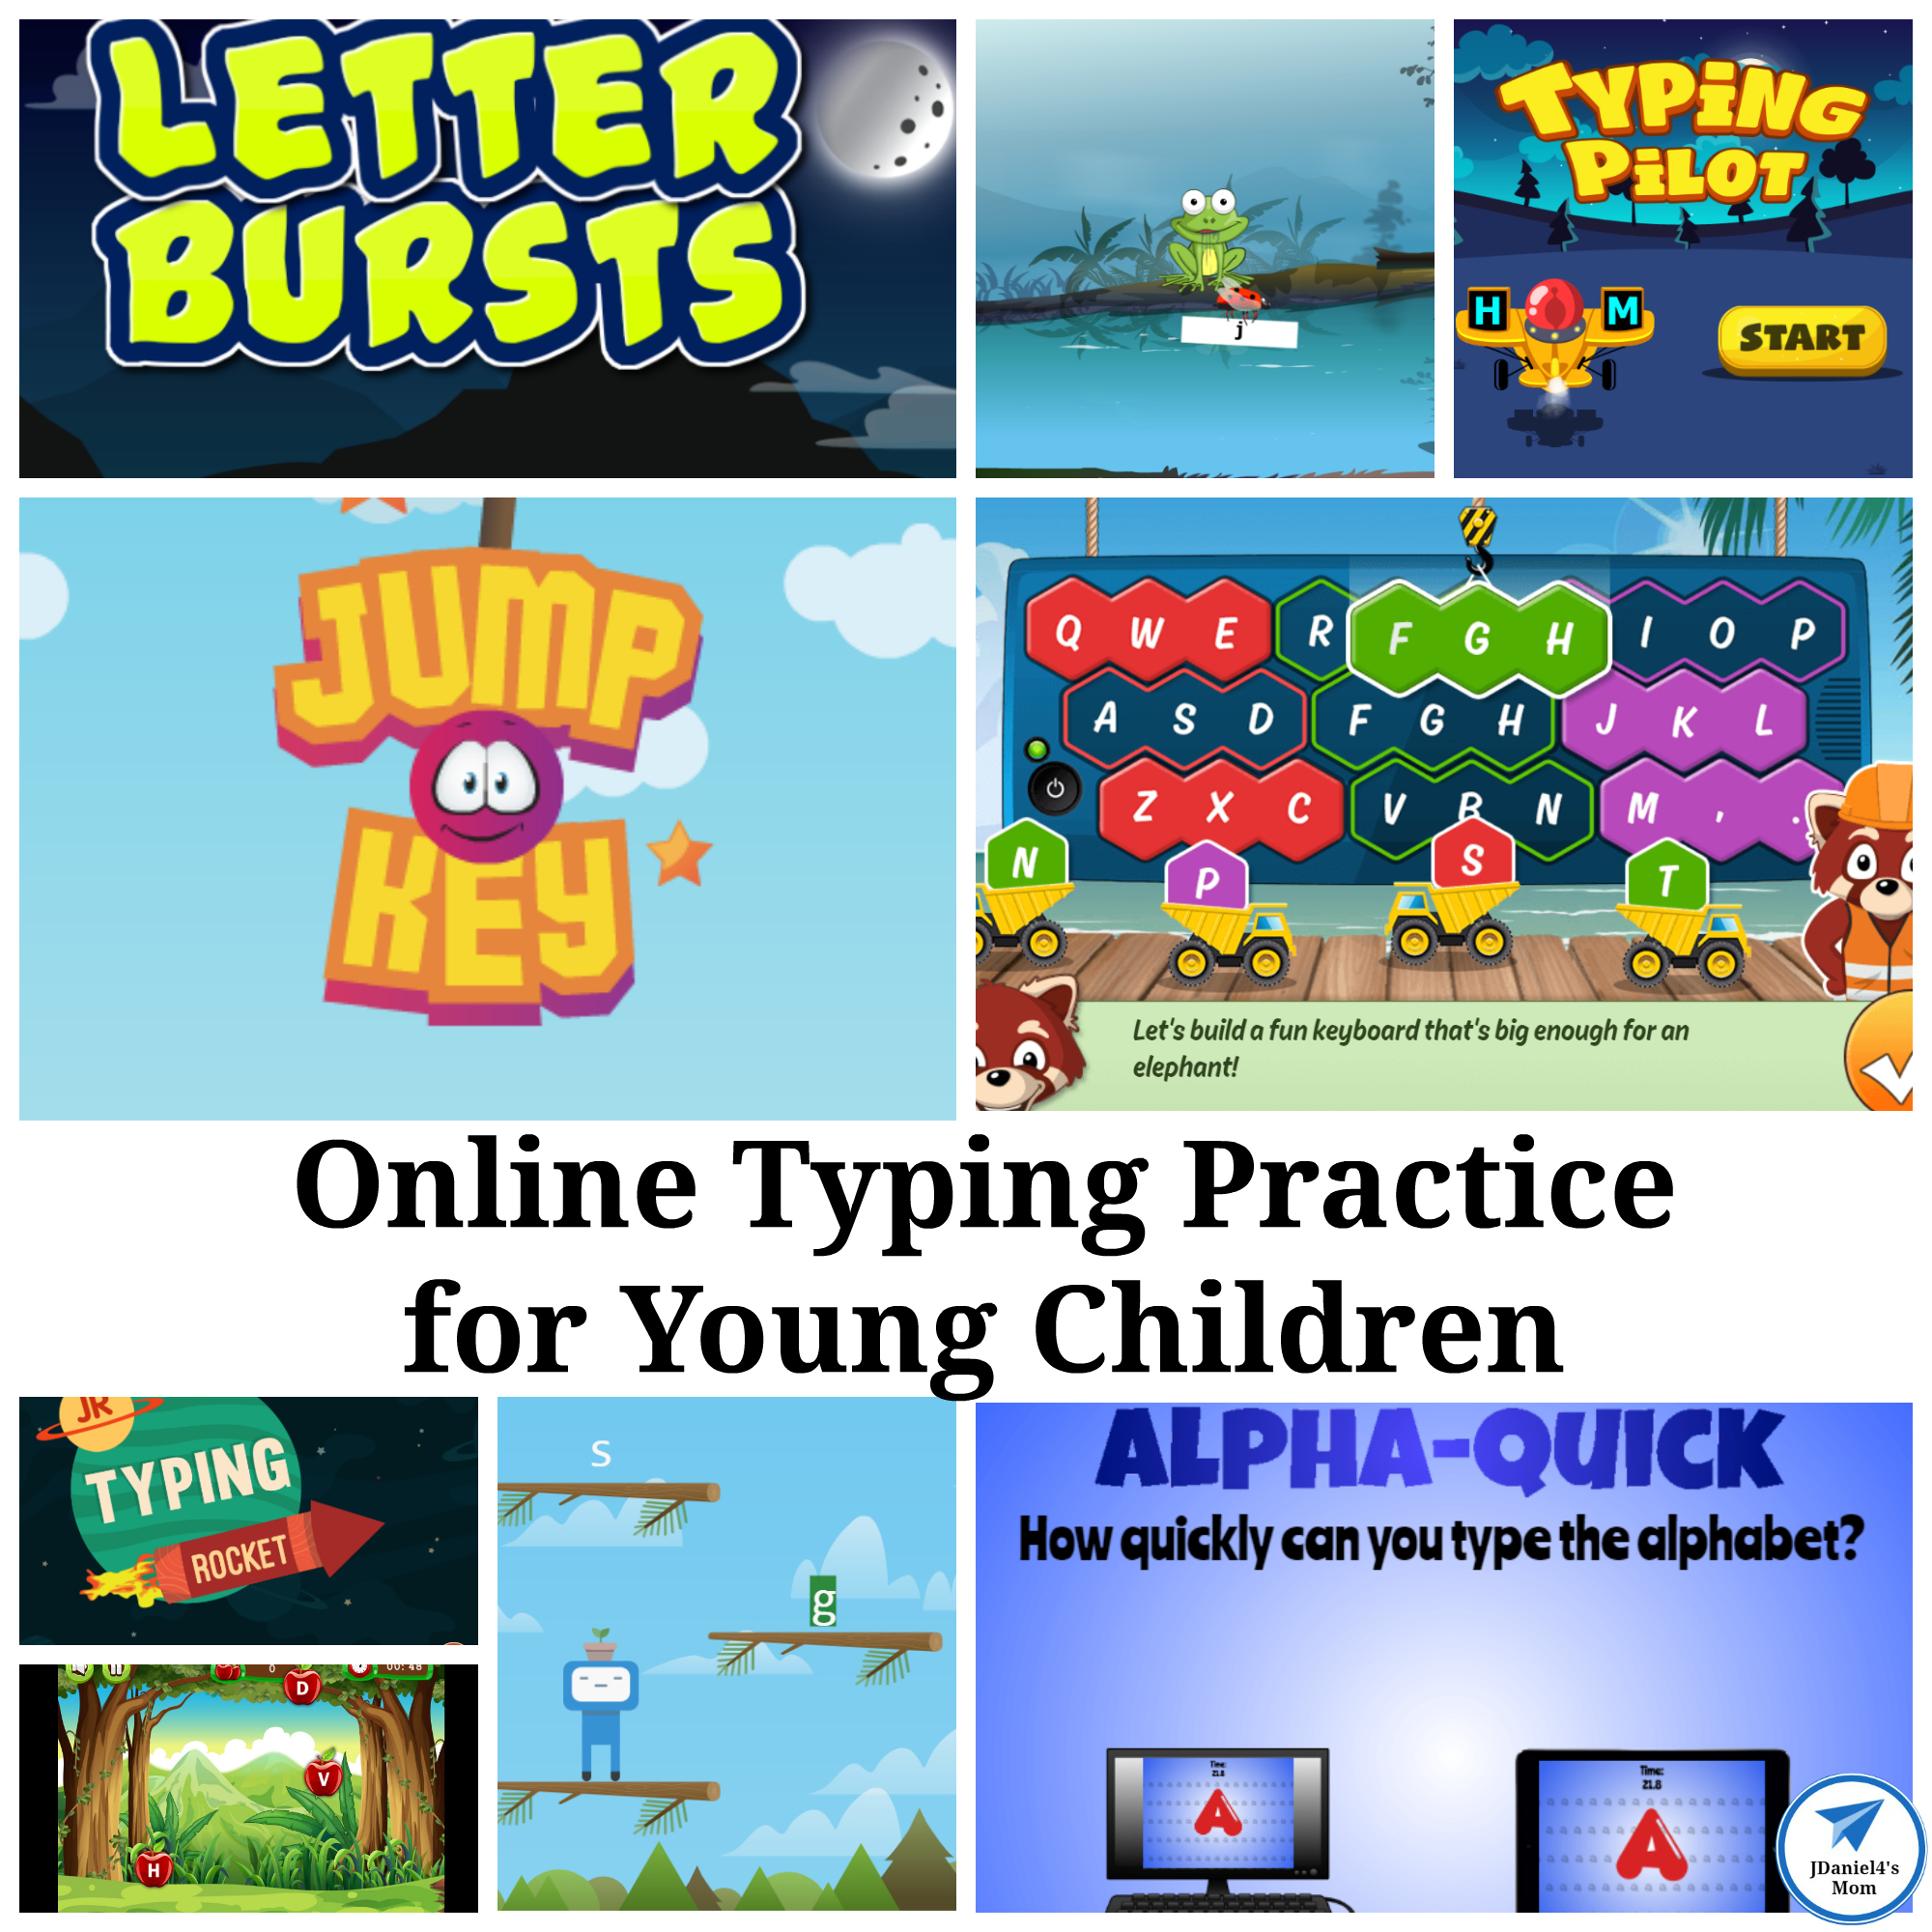 Online Typing Practice for Young Children